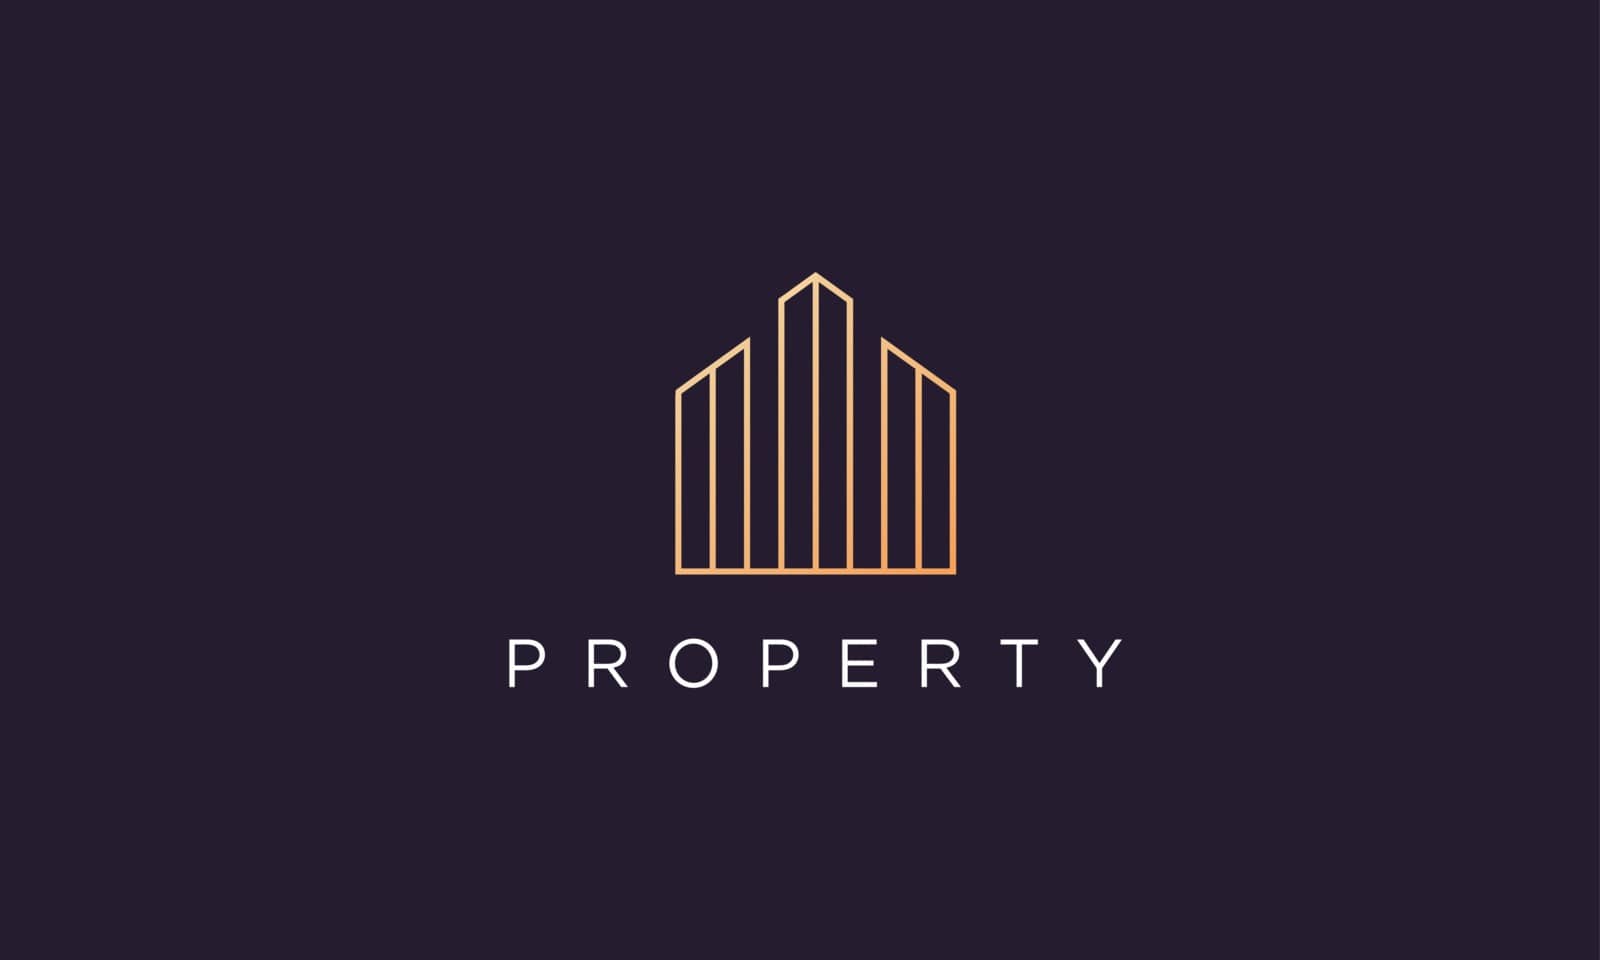 logo design template for a luxury and classy property company with a professional and modern style by murnifine